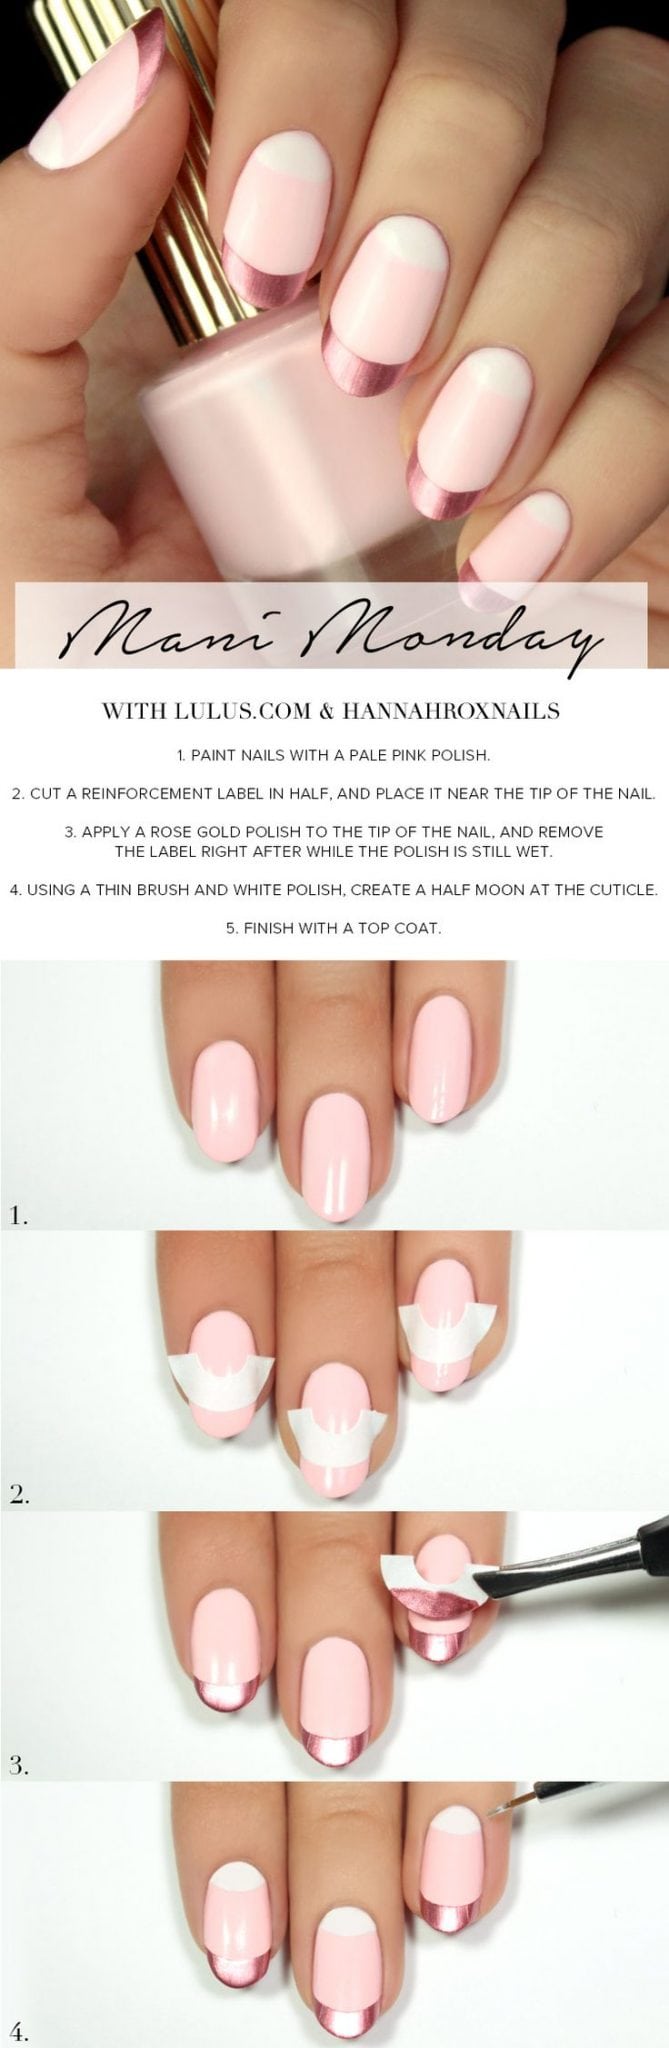 [ad_1]

Mani Monday: Rose Gold and Pink Valentine’s Day Nail Tutorial | Lulus.com Fashion Blog | Bloglovin’
Source by beata0704
[ad_2]
			
			…